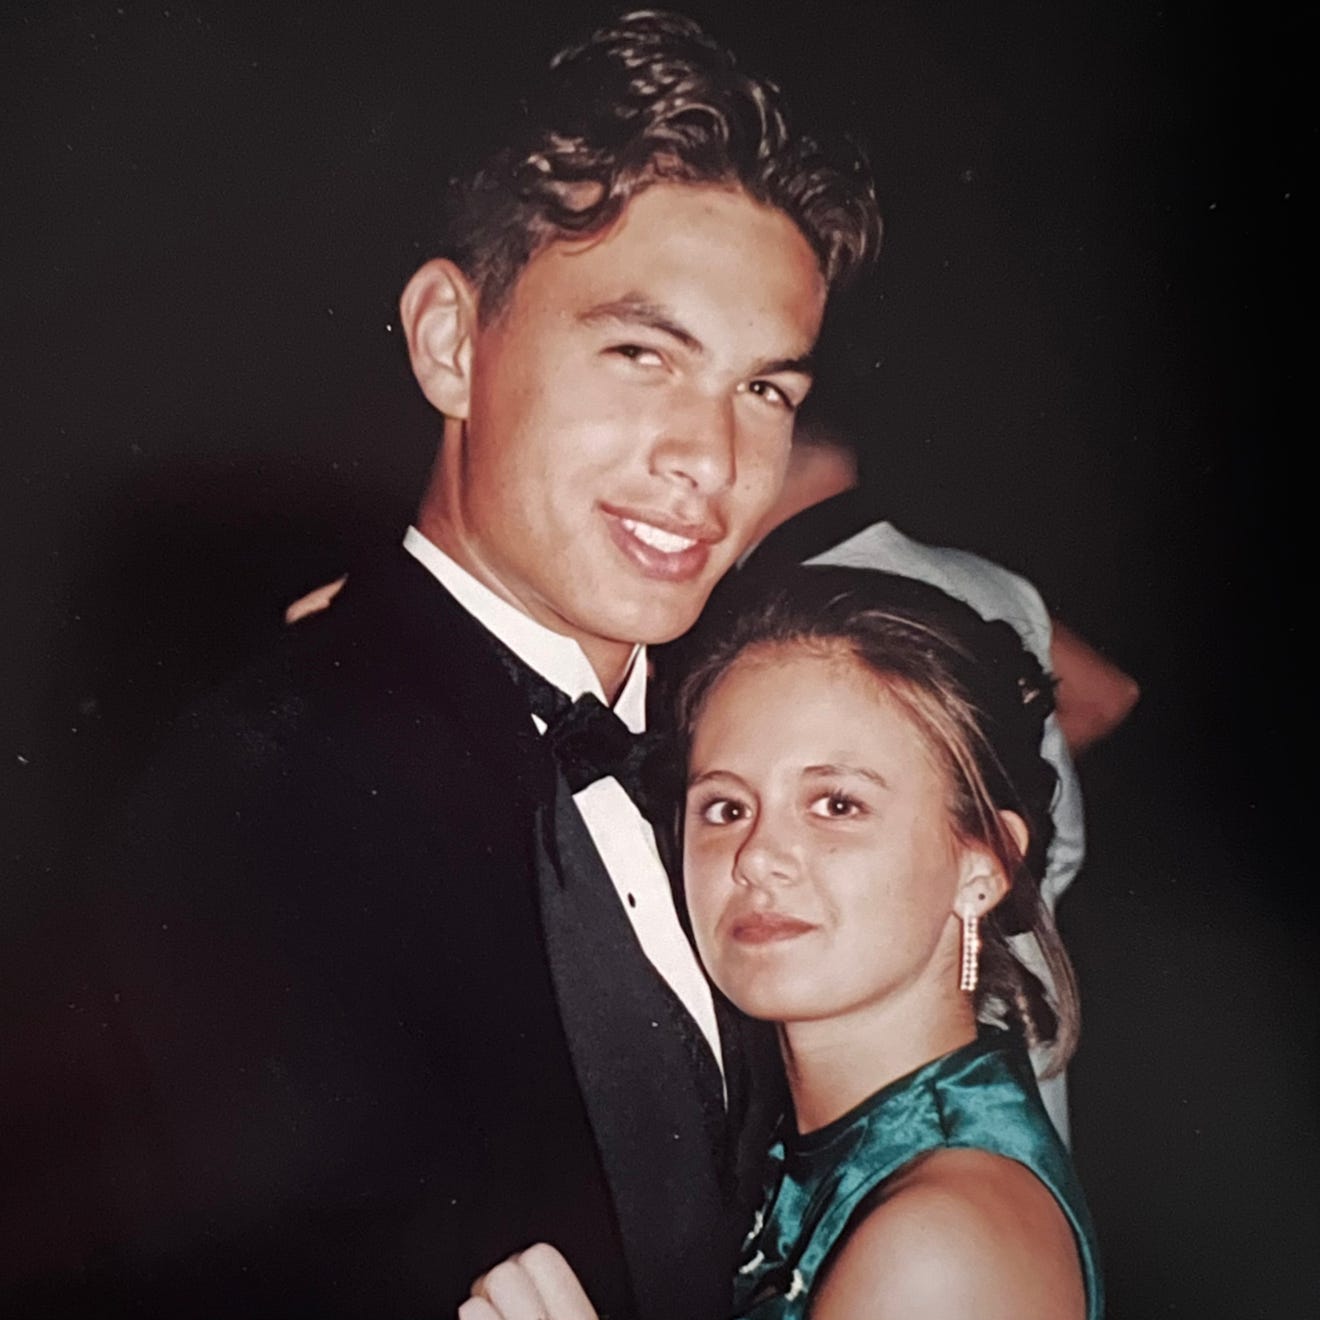 Prom night flashback: See your fave celebrities in dresses, suits before they were famous